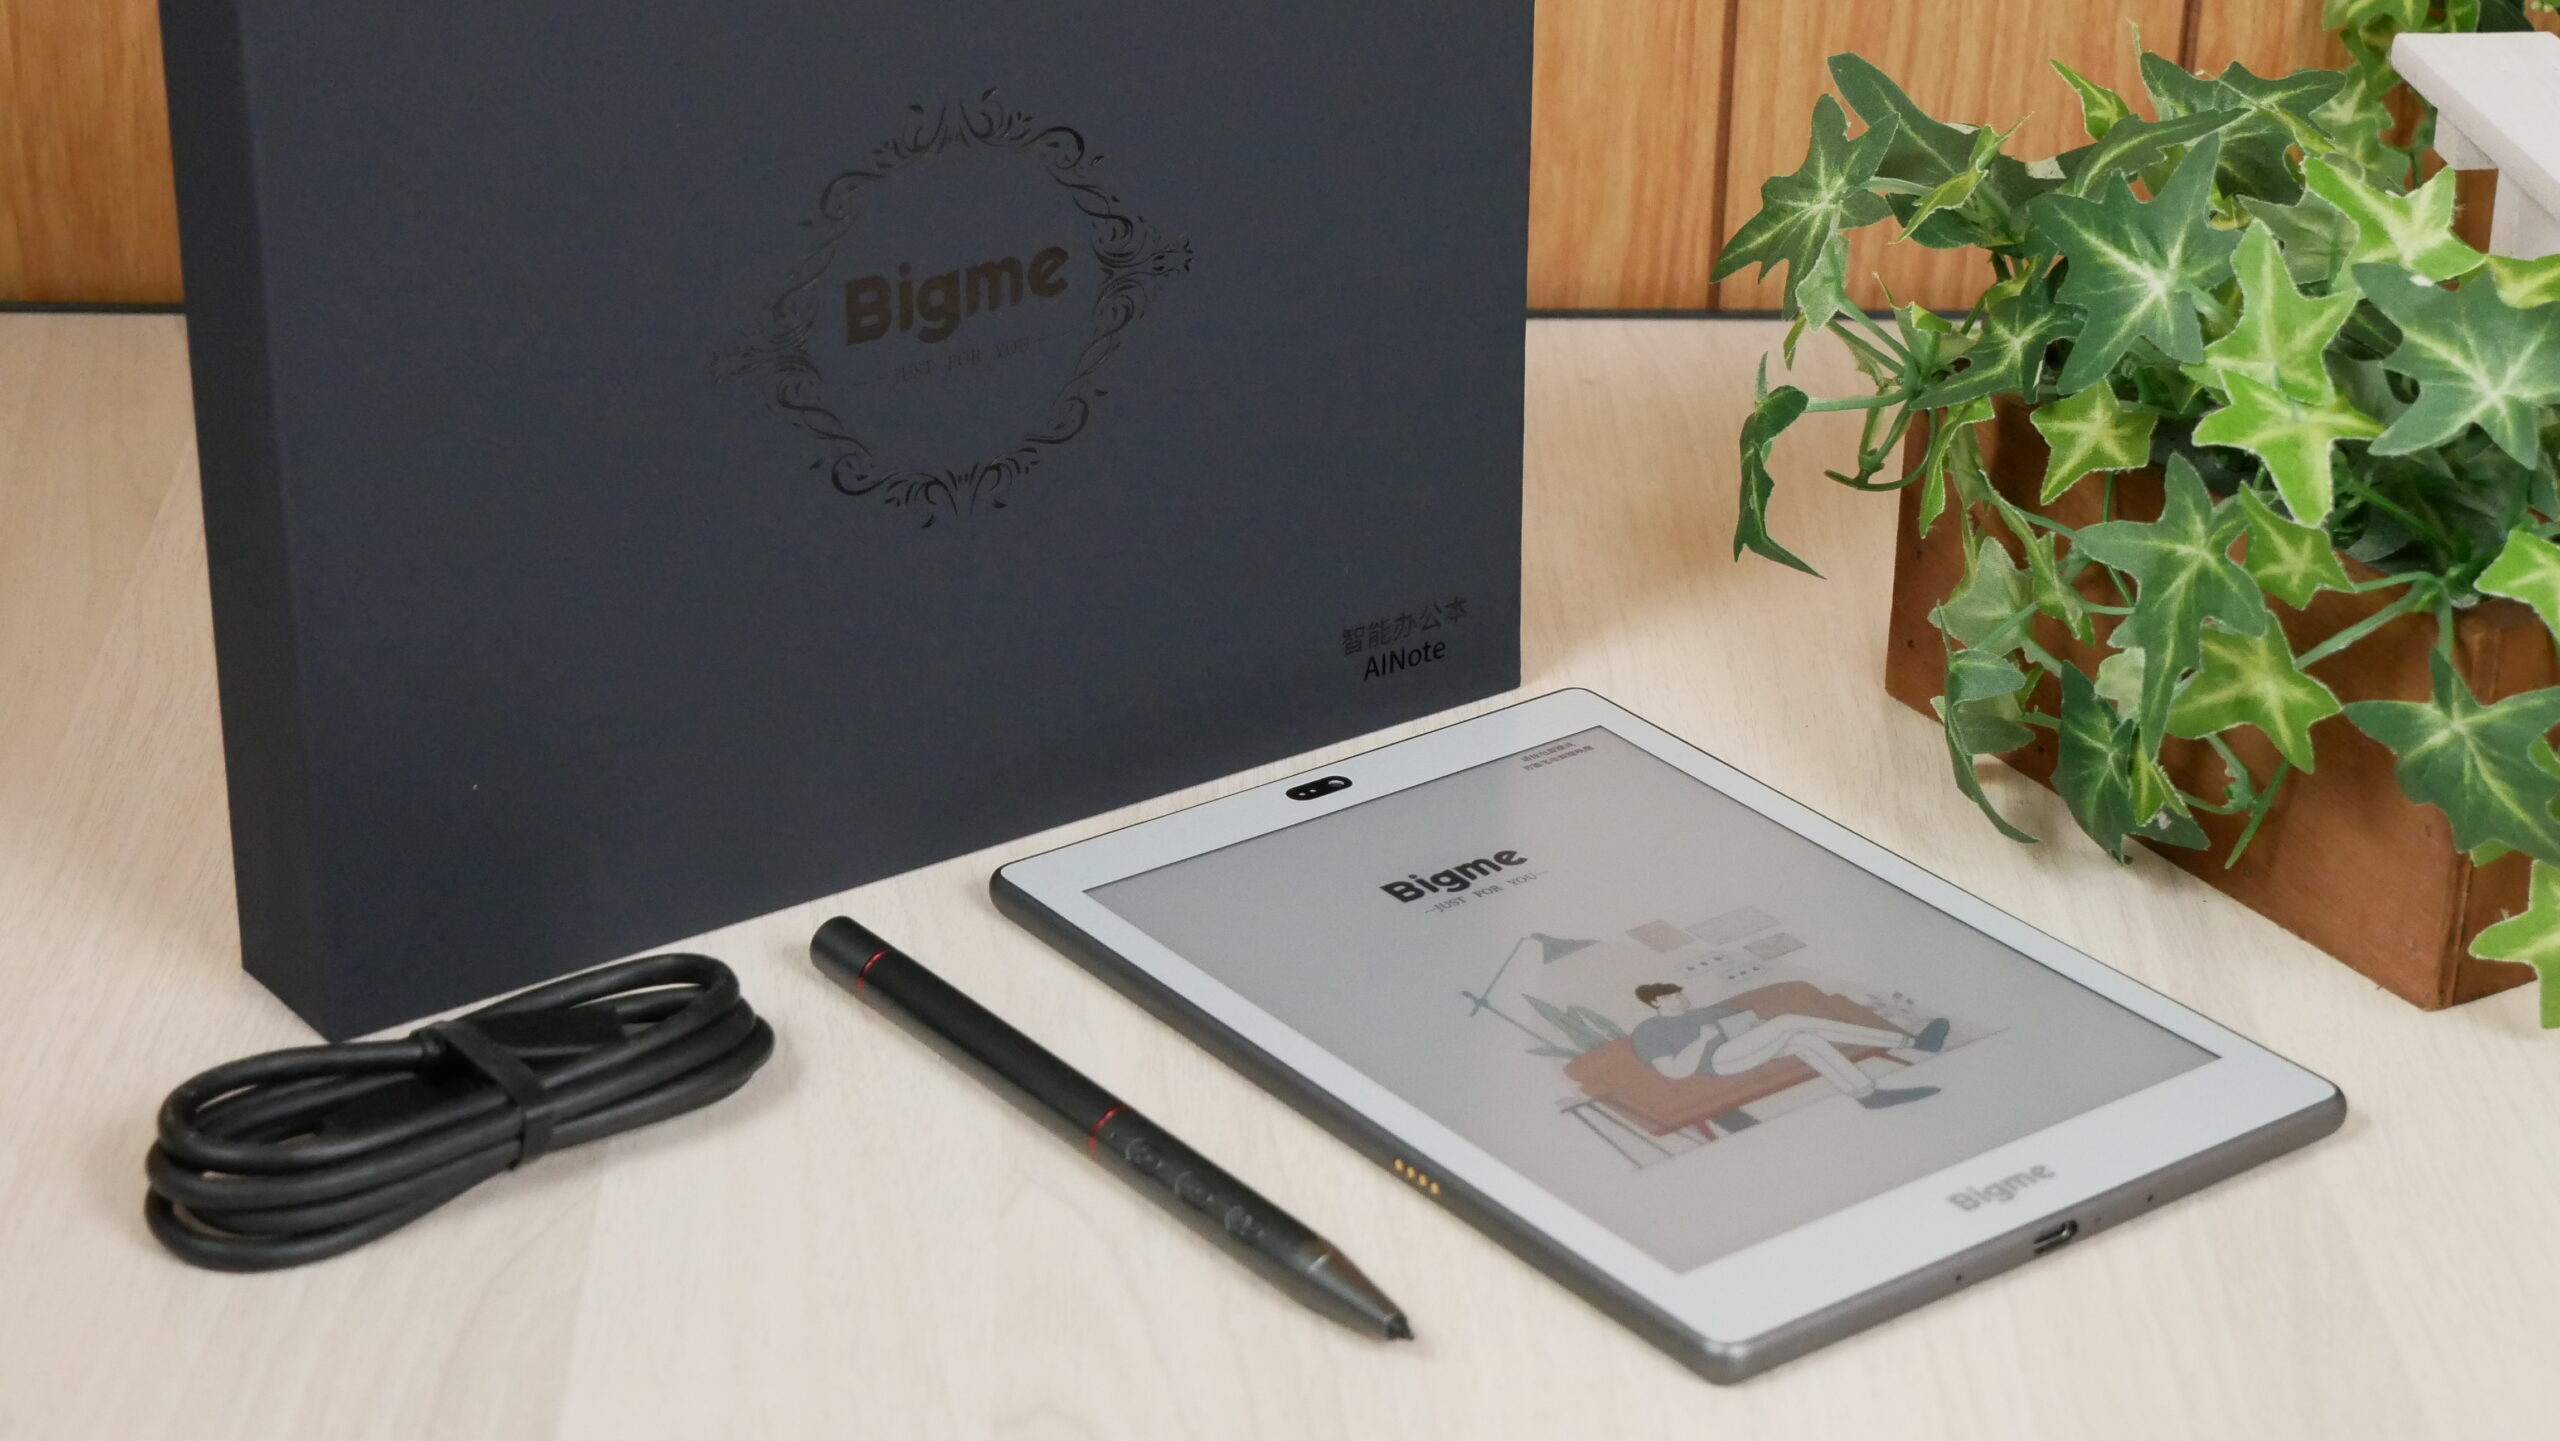 Bigme S6: E-book with colour E-Ink display and built-in ChatGPT for $500